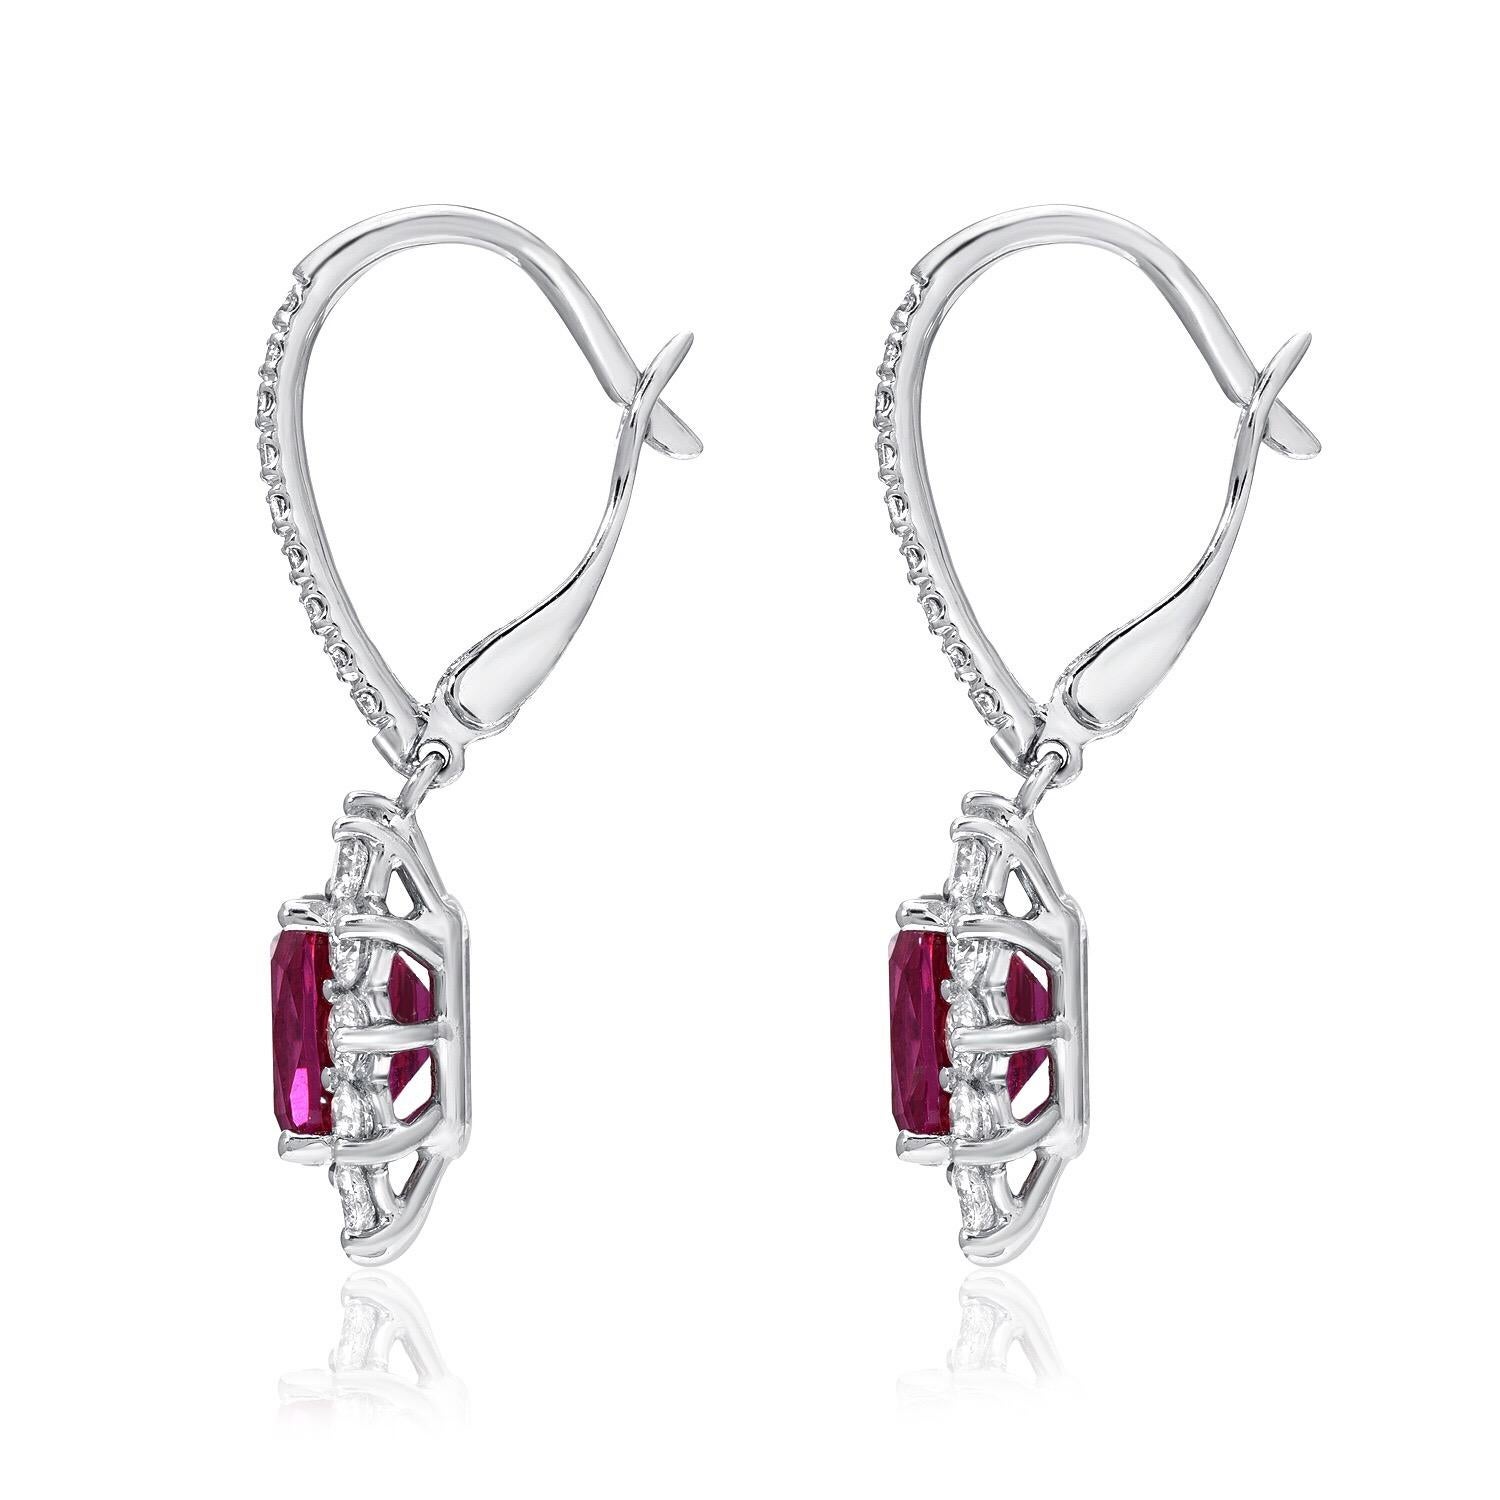 Vibrant pair of certified vivid pinkish-red Rubies, weighing a total of 2.84 carats, adorned by round brilliant diamonds weighing a total of 1.28 carats, in 18K white gold lever back earrings.
Approximately 1